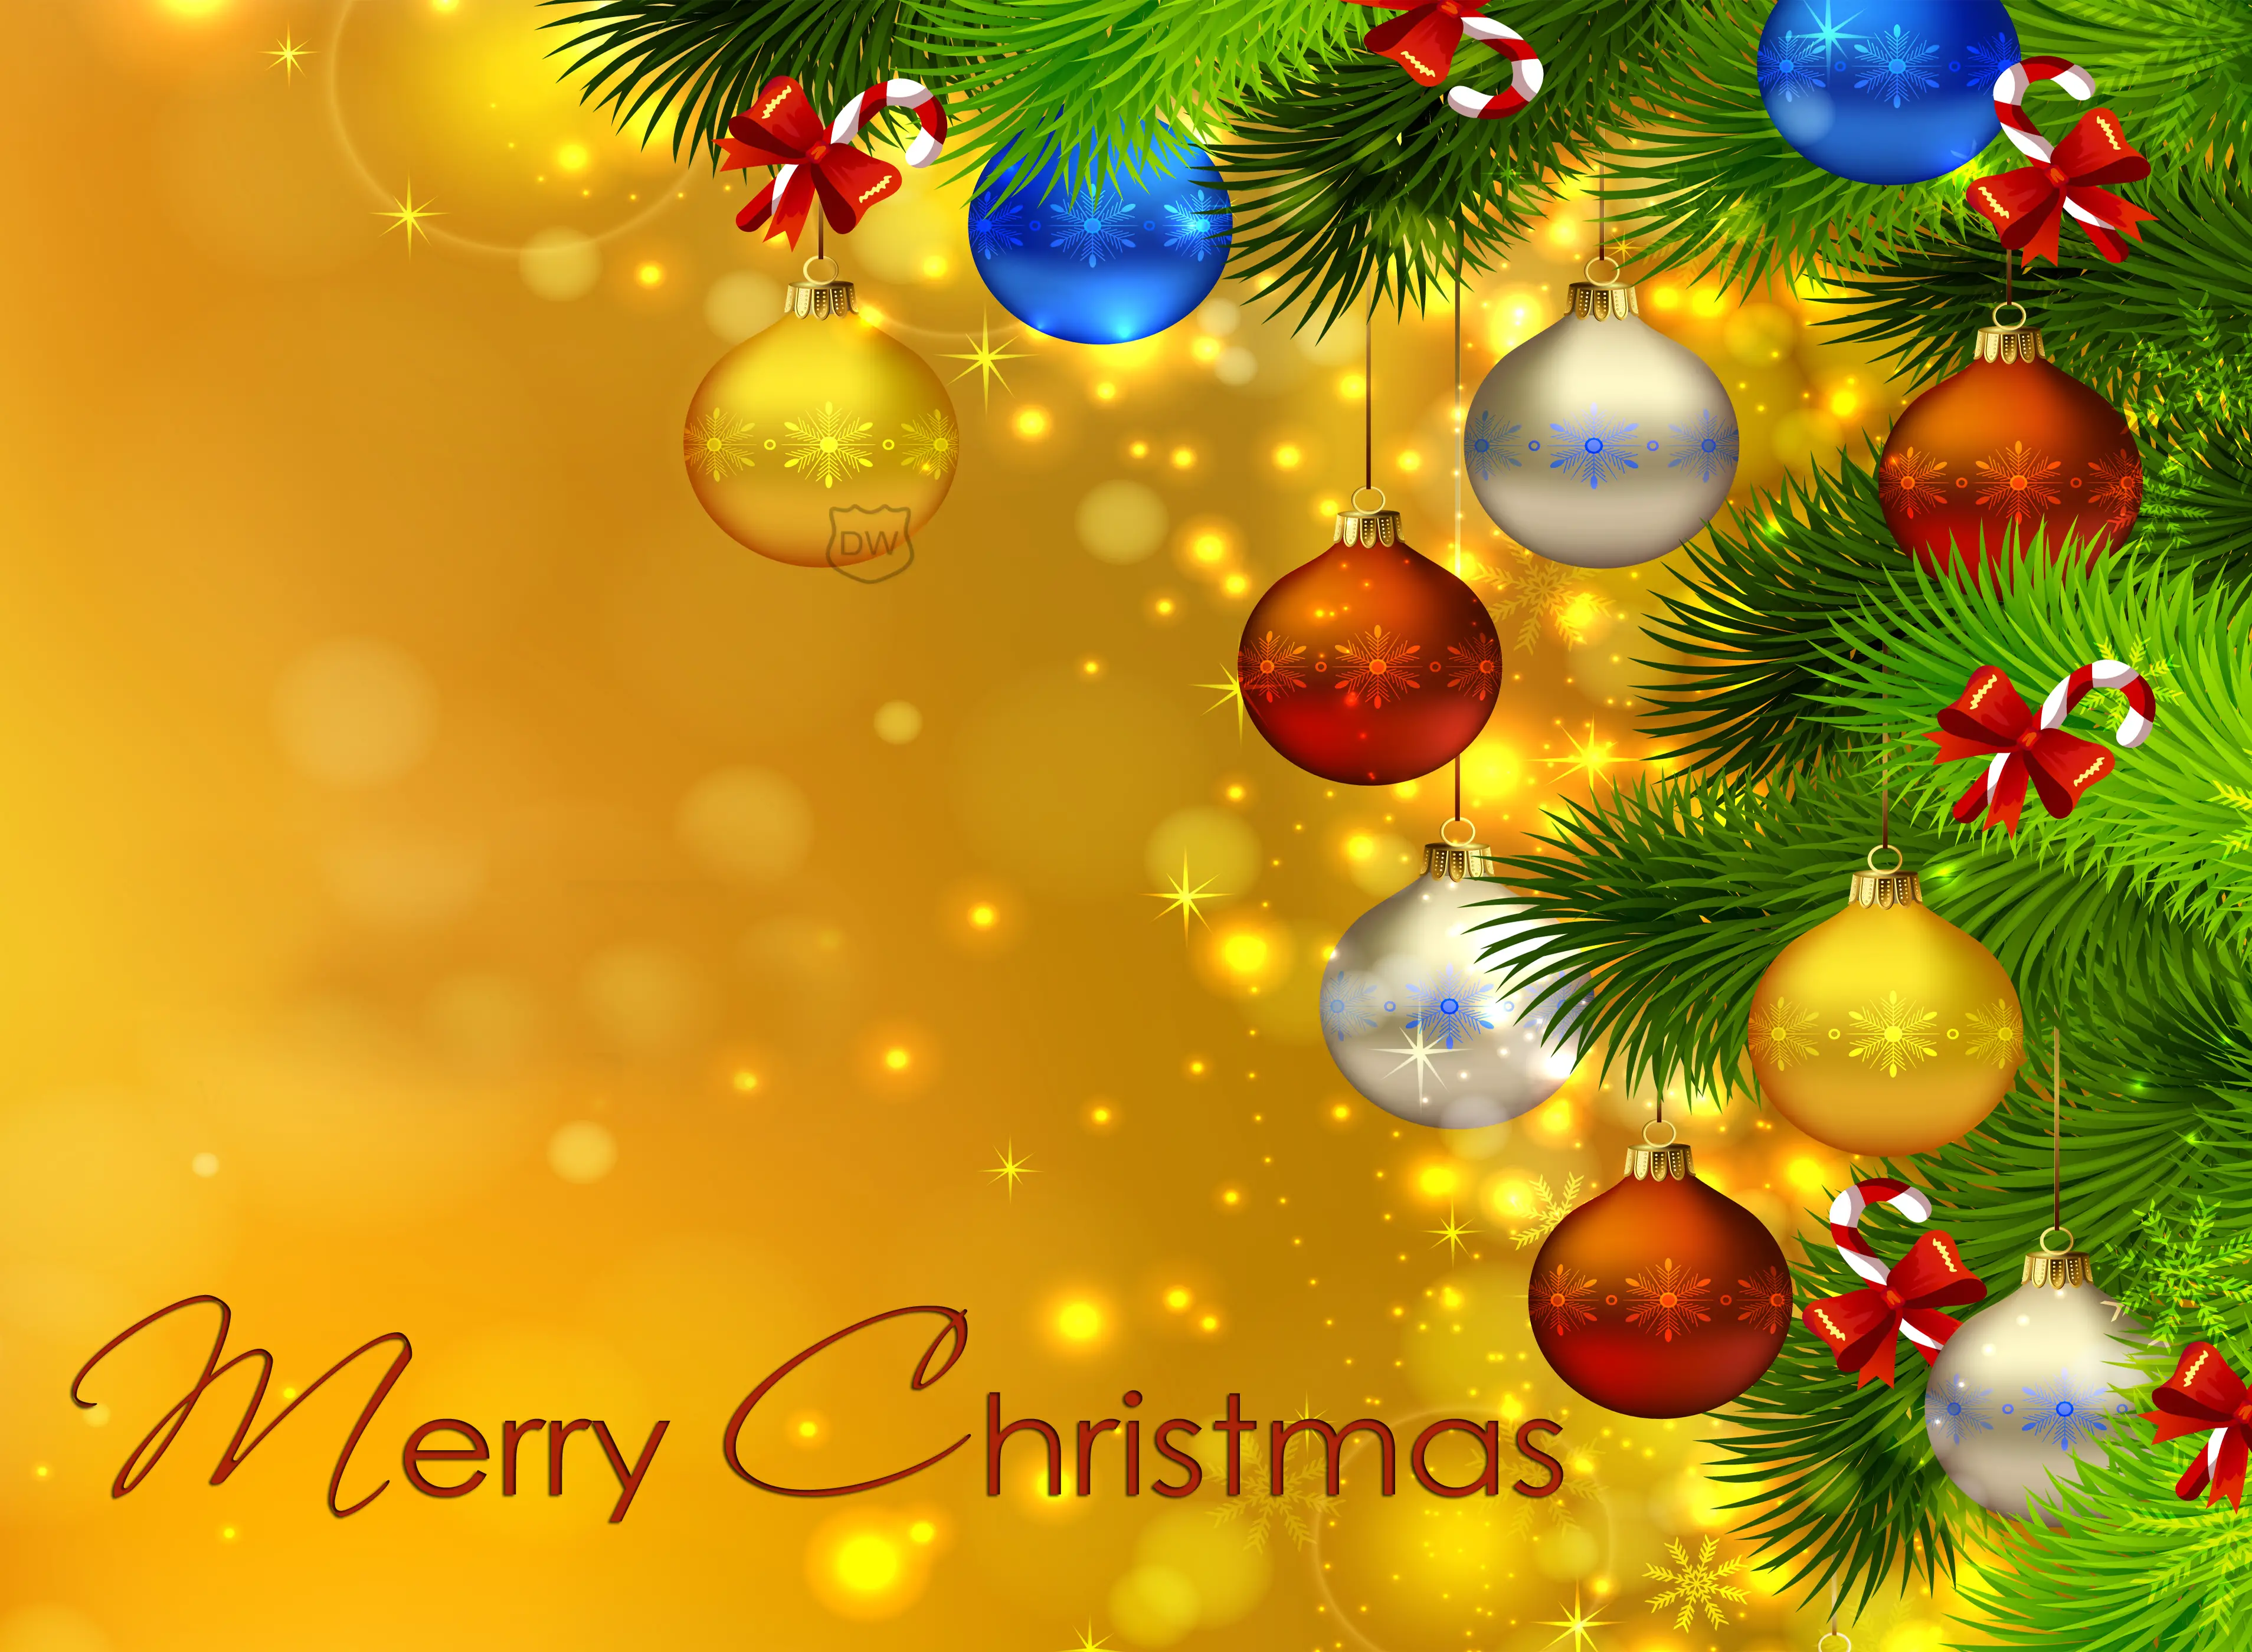 Merry Christmas 2014 Wallpapers | Movie HD Wallpapers